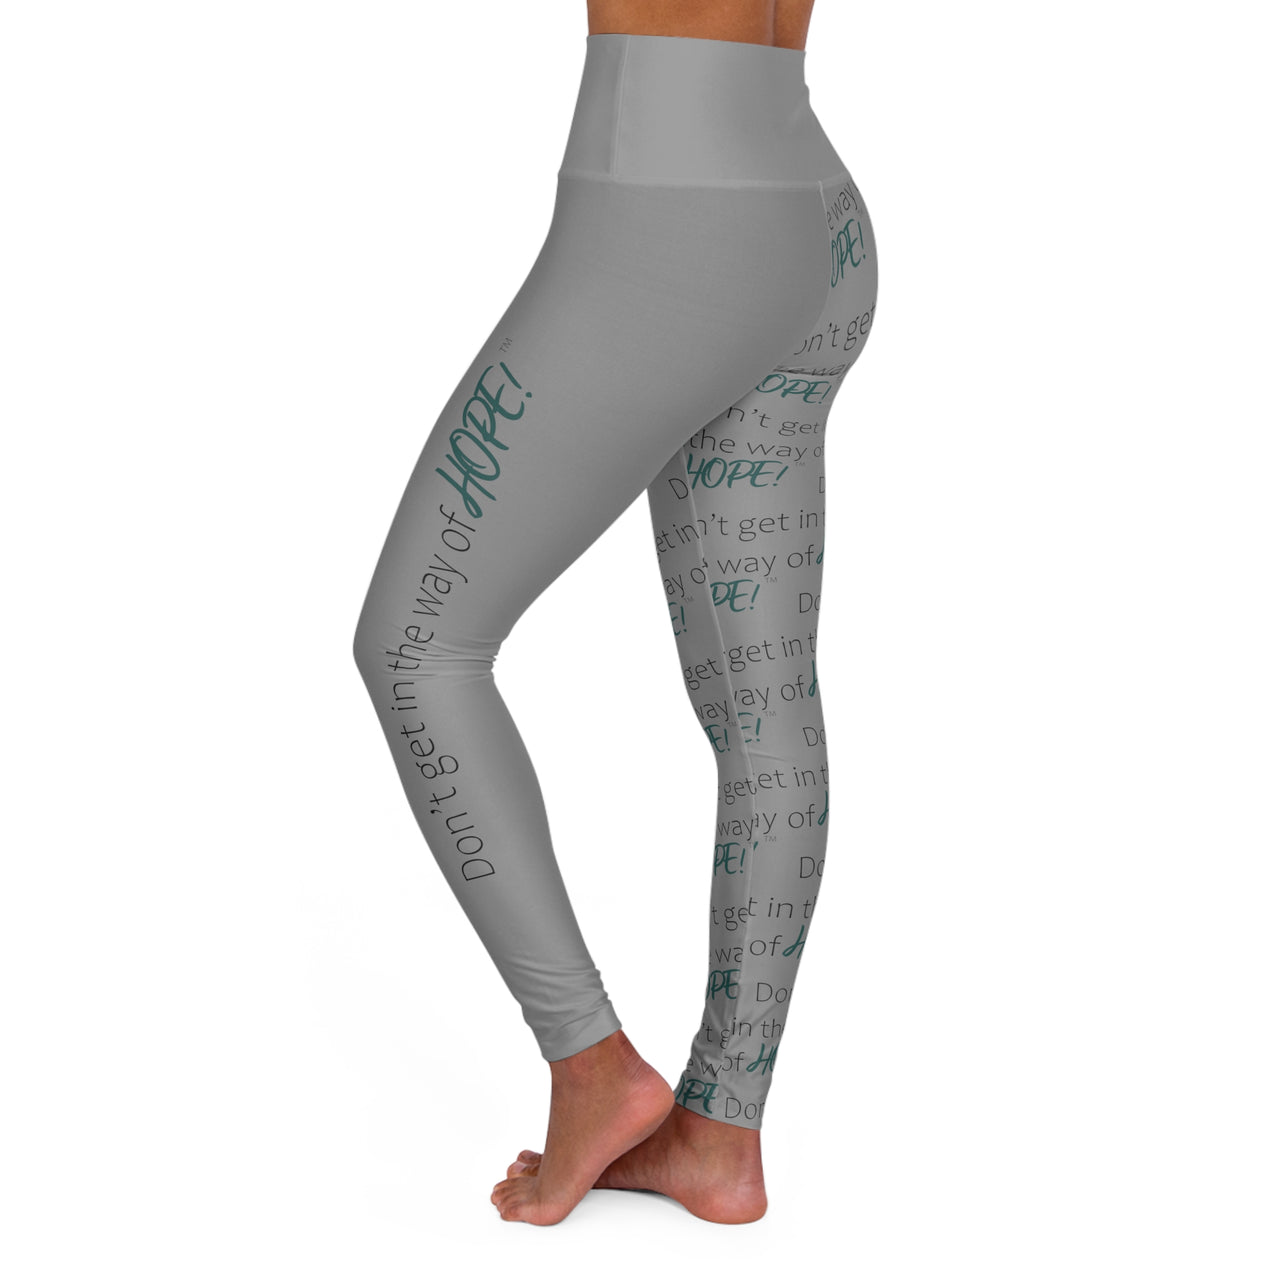 Don't Get in the Way of HOPE! High Waisted Yoga Leggings